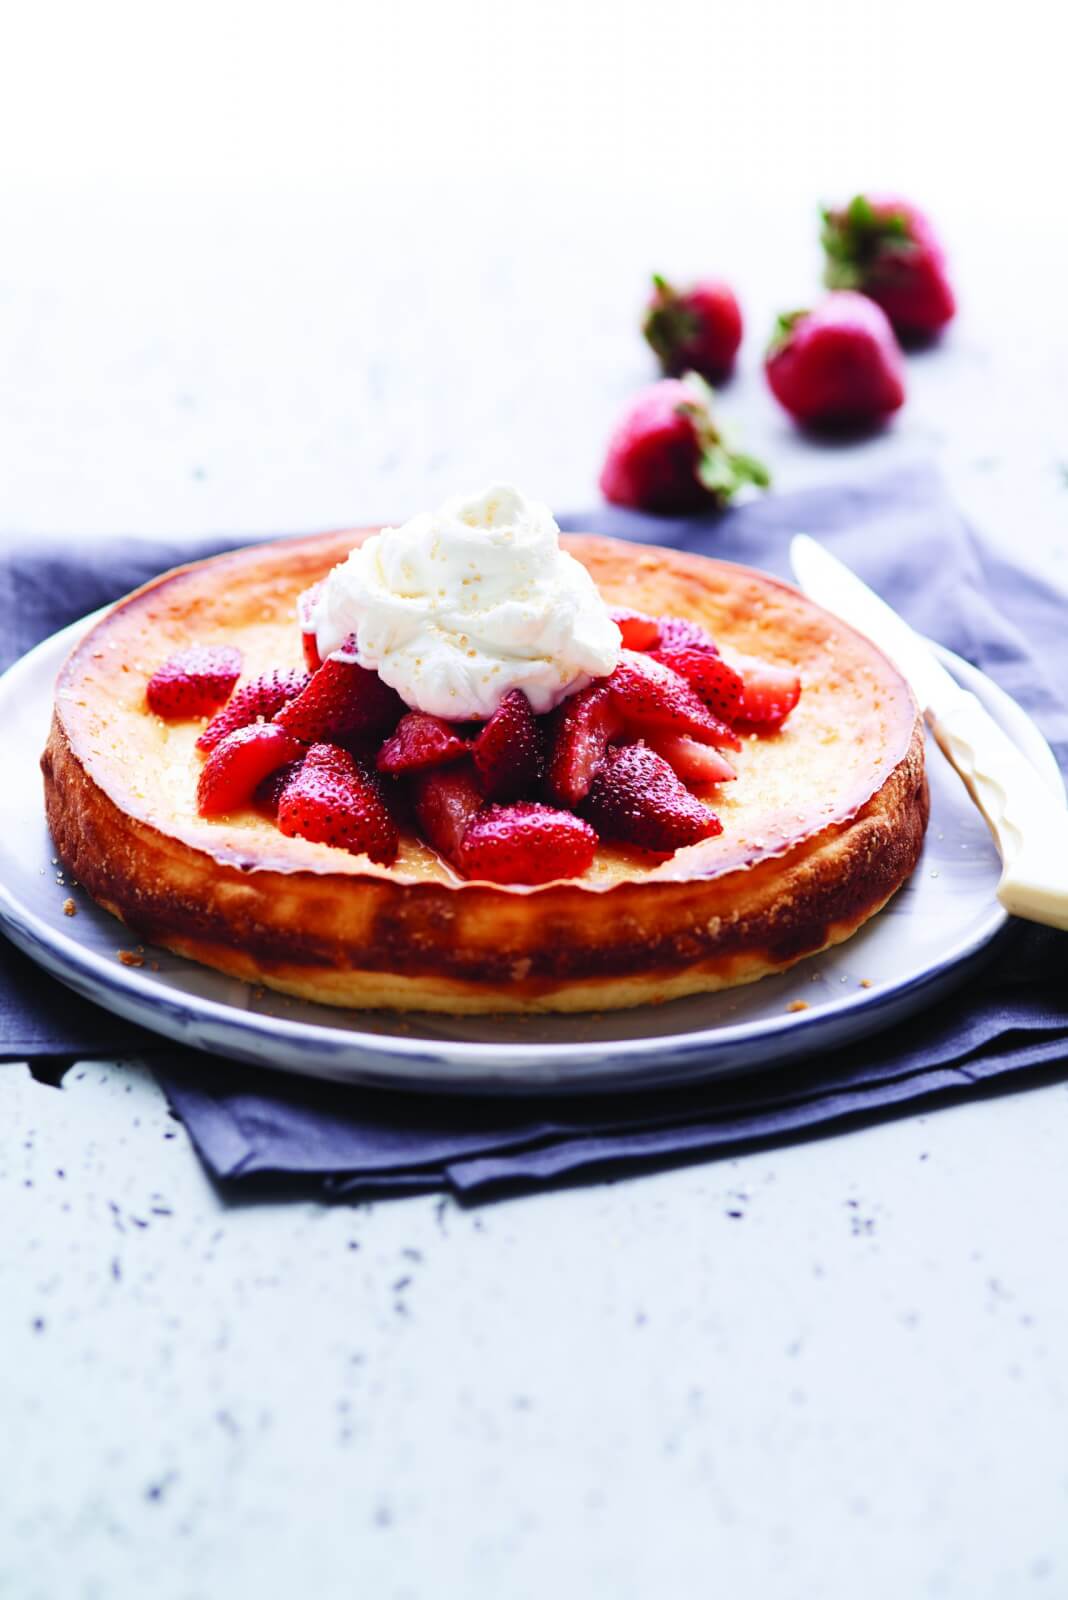 Mini ricotta cake topped with fresh strawberries and whipped cream.